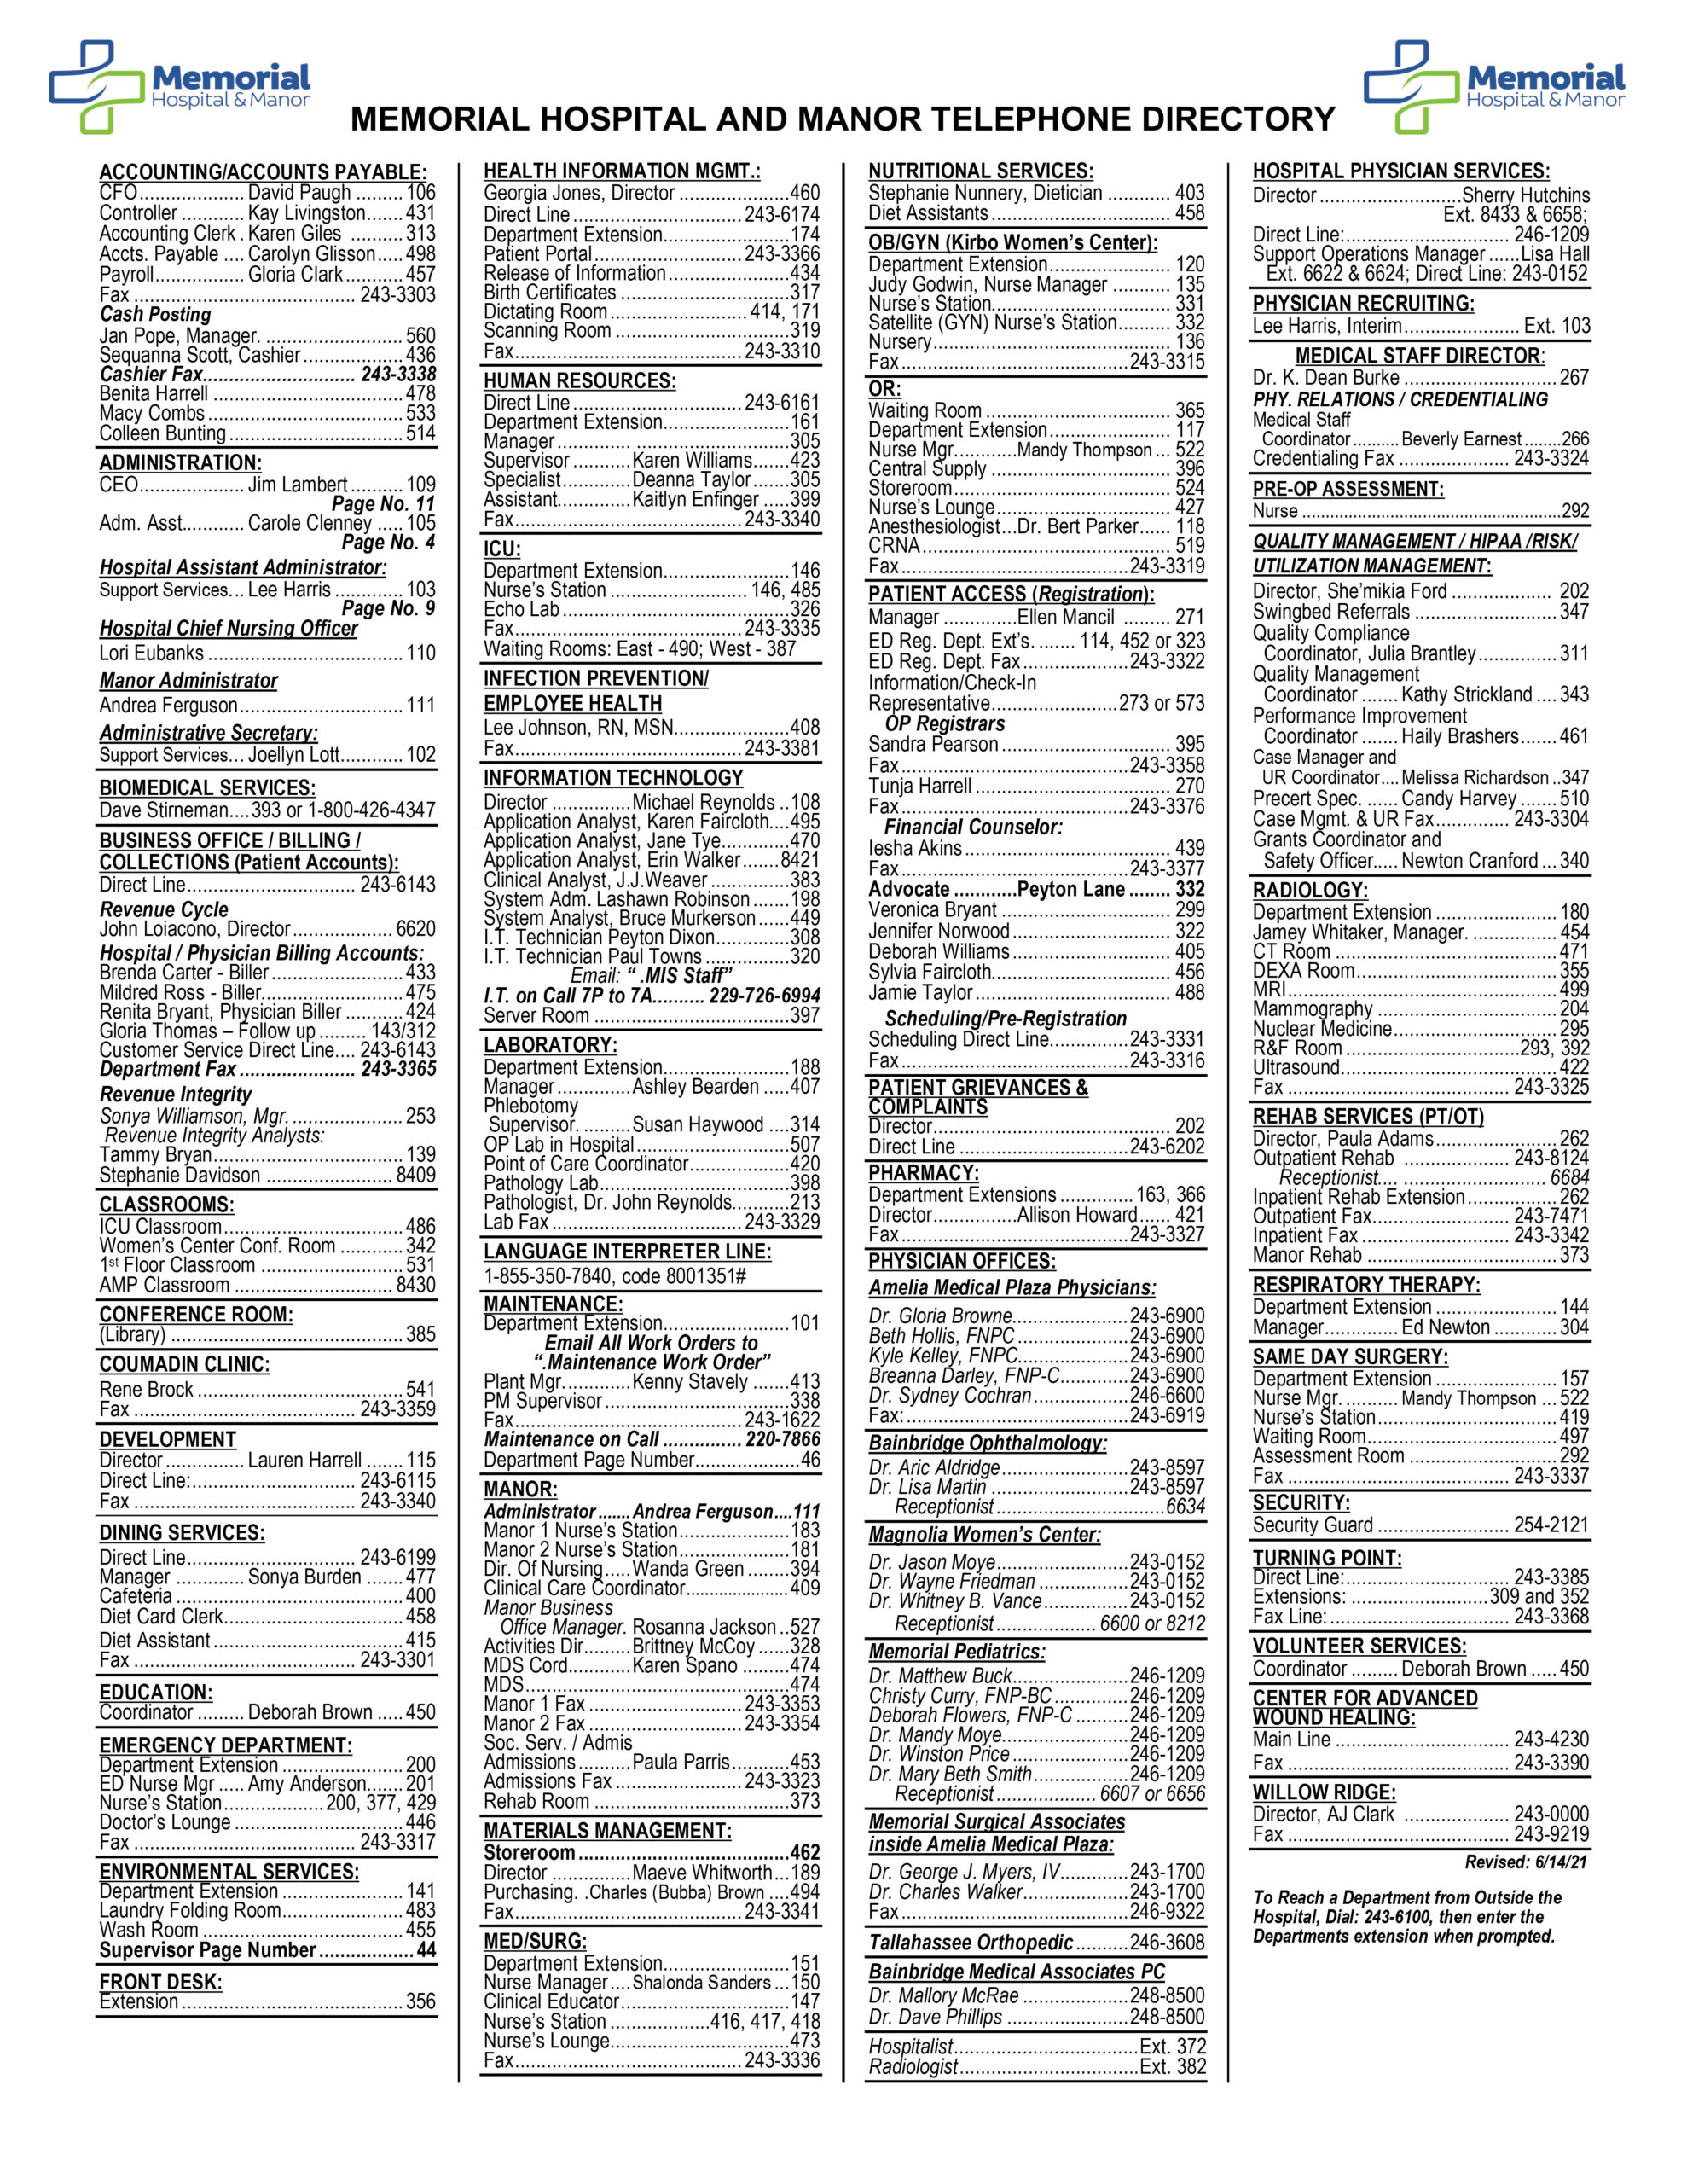 Revised-Telephone-Directory-6-14-21